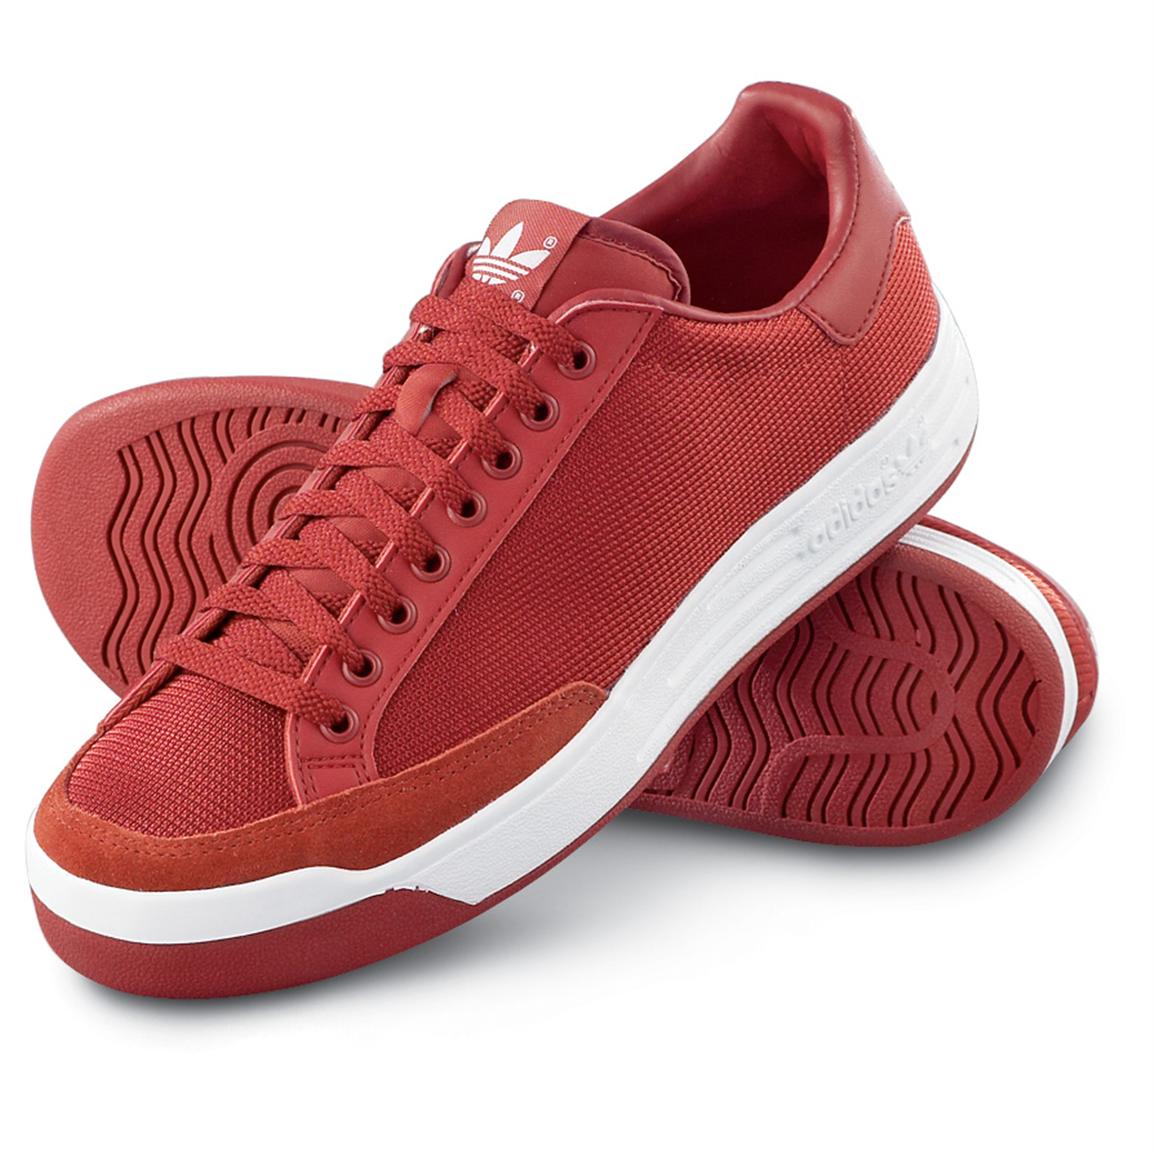 Adidas® Rod Laver Shoes, Red / White 